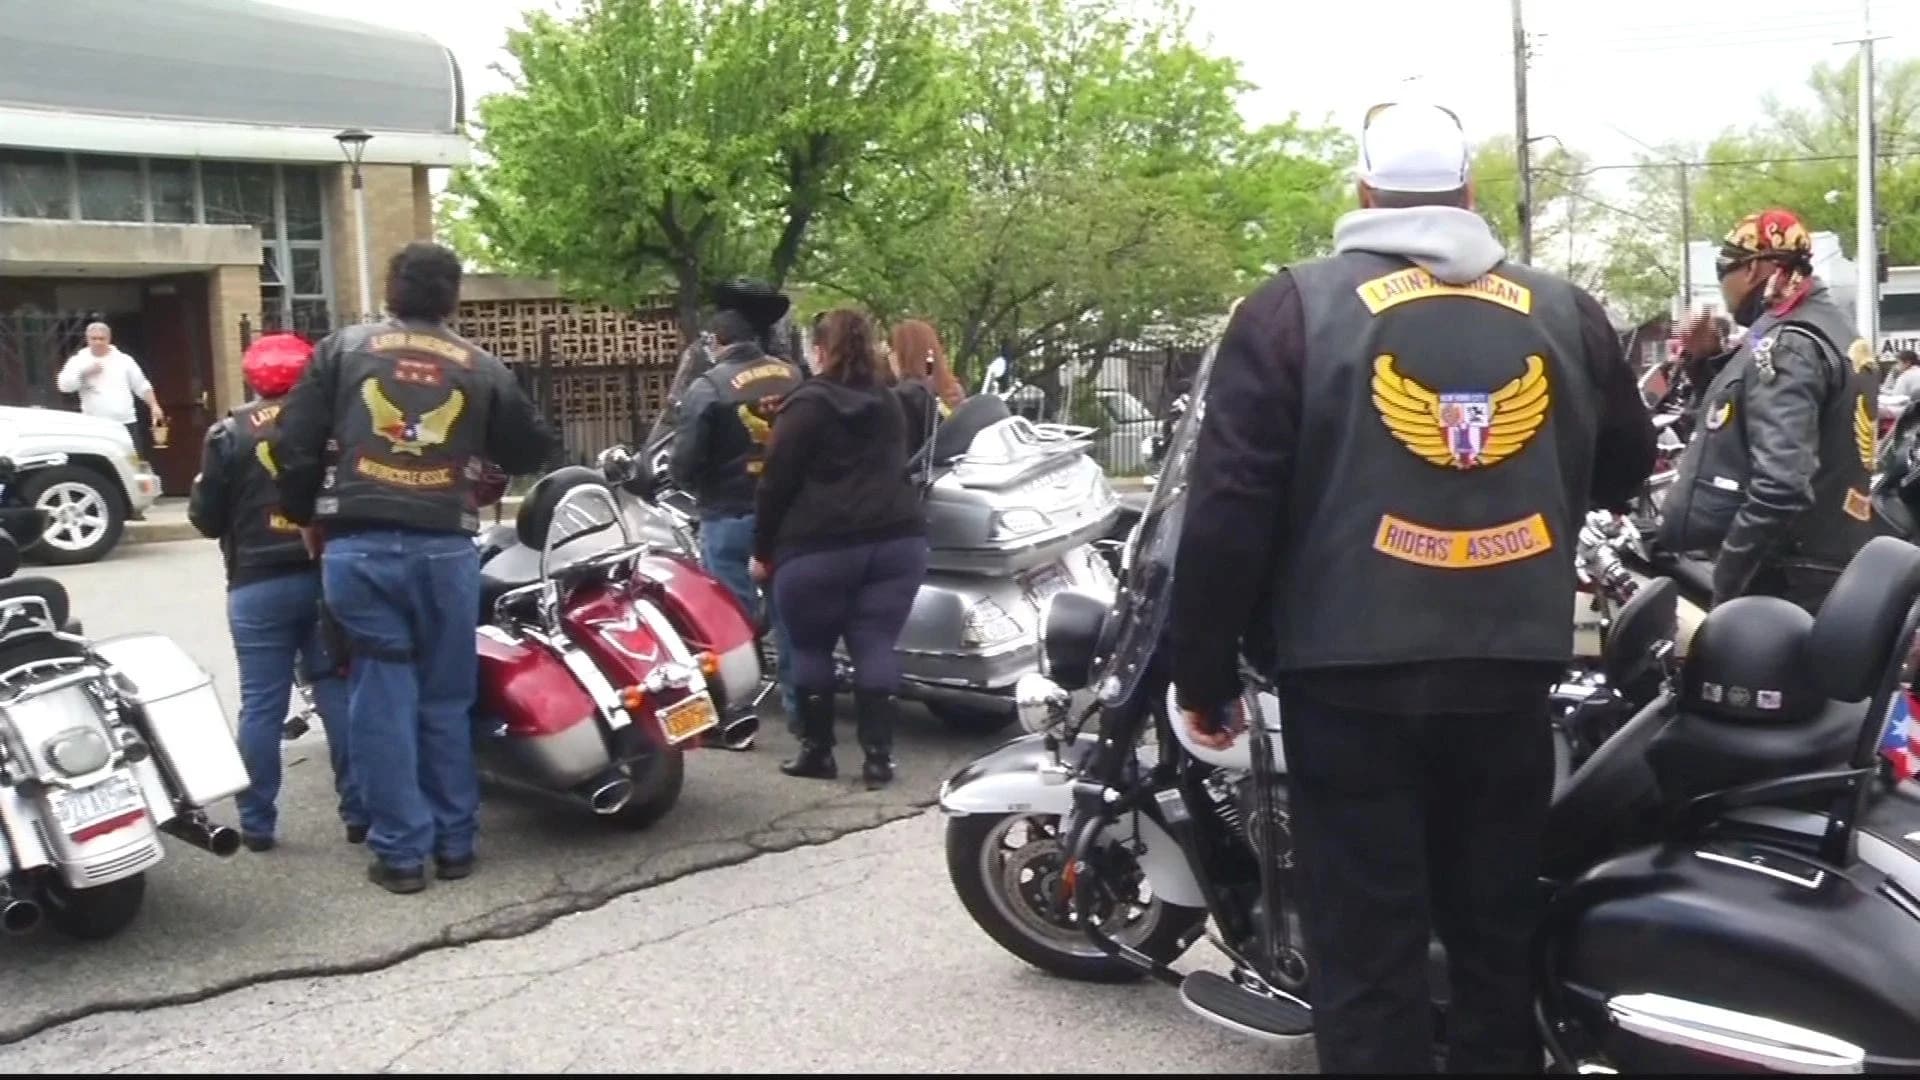 Bikers, police team up to improve relations